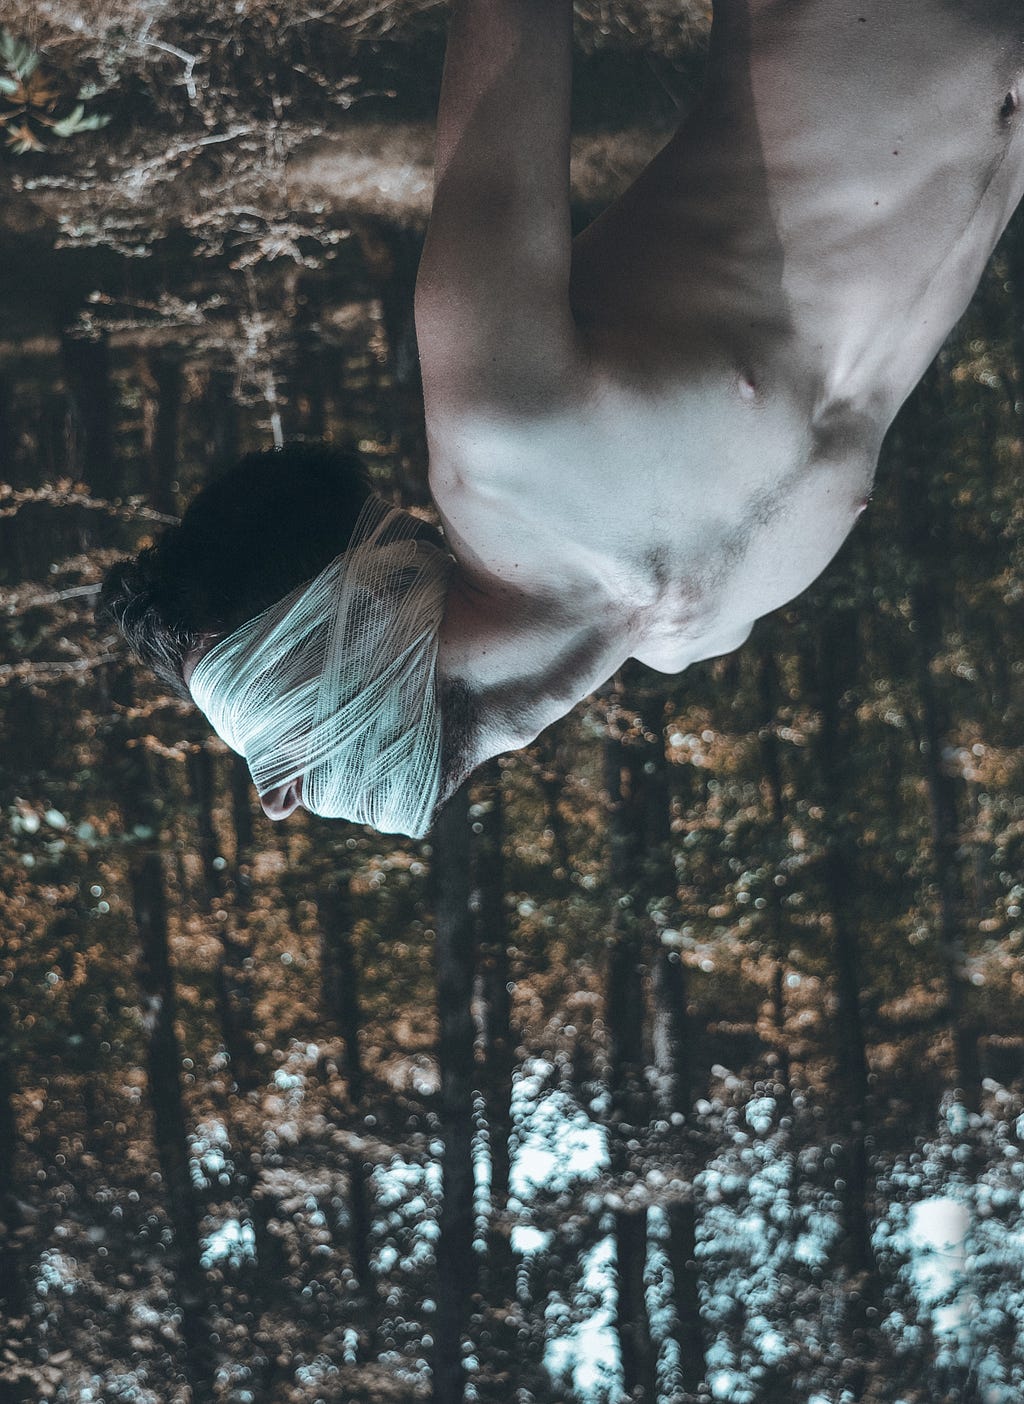 An upside down photo of a shirtless man who is bound and gagged